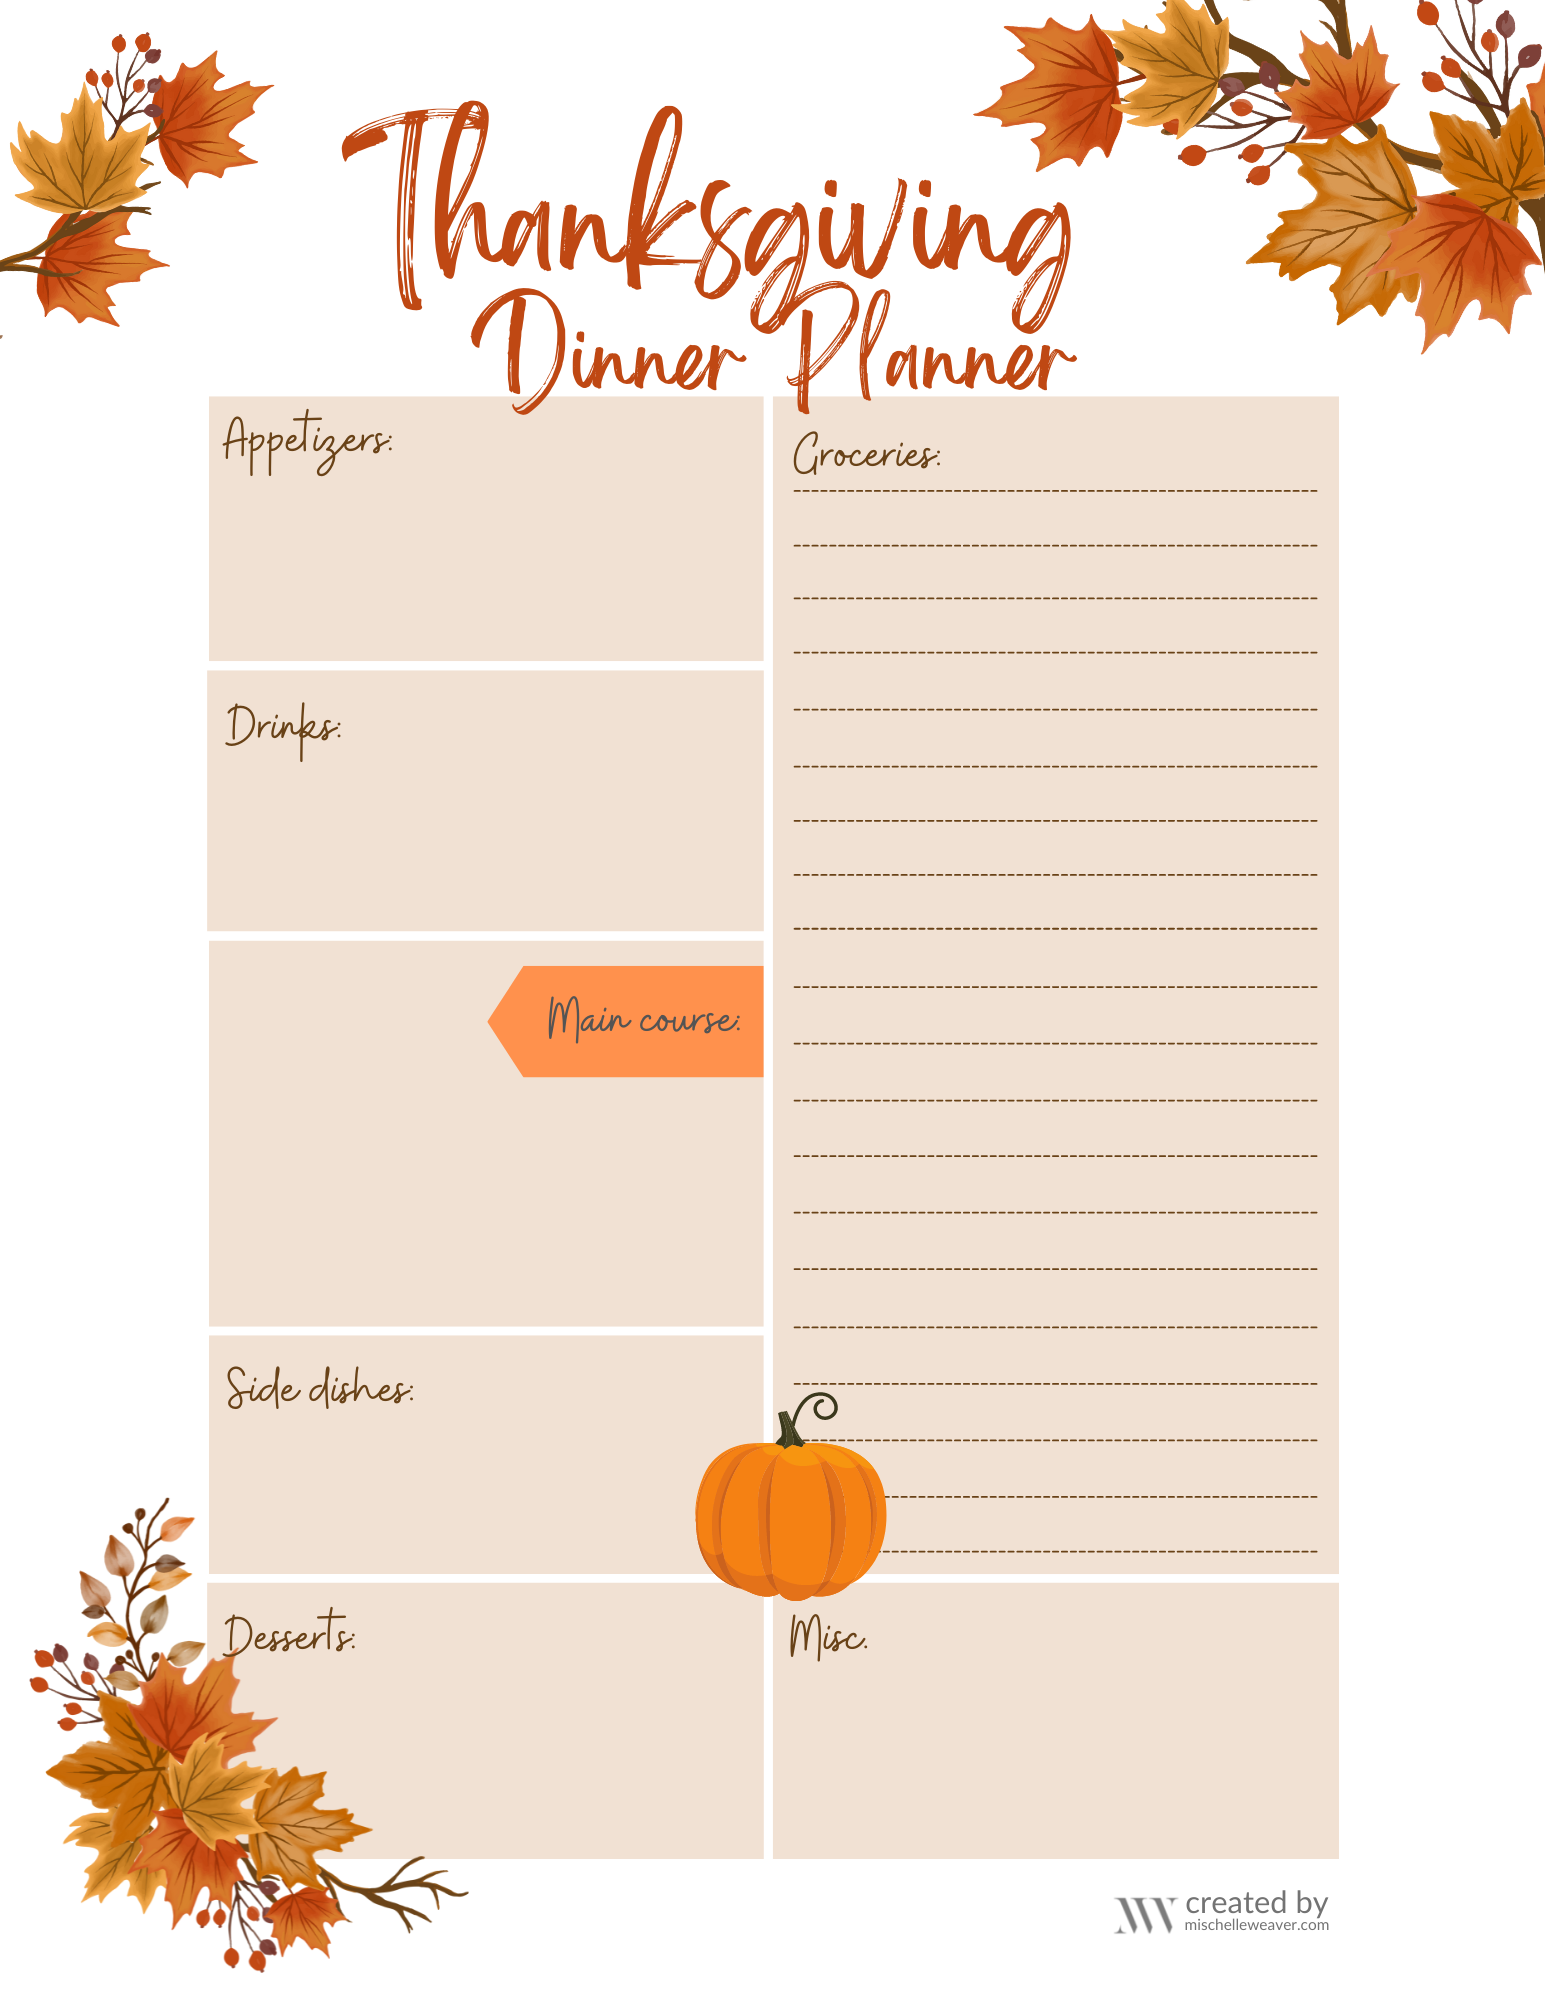 Free Printable Thanksgiving Cooking Planner and Schedule — Mischelle Weaver